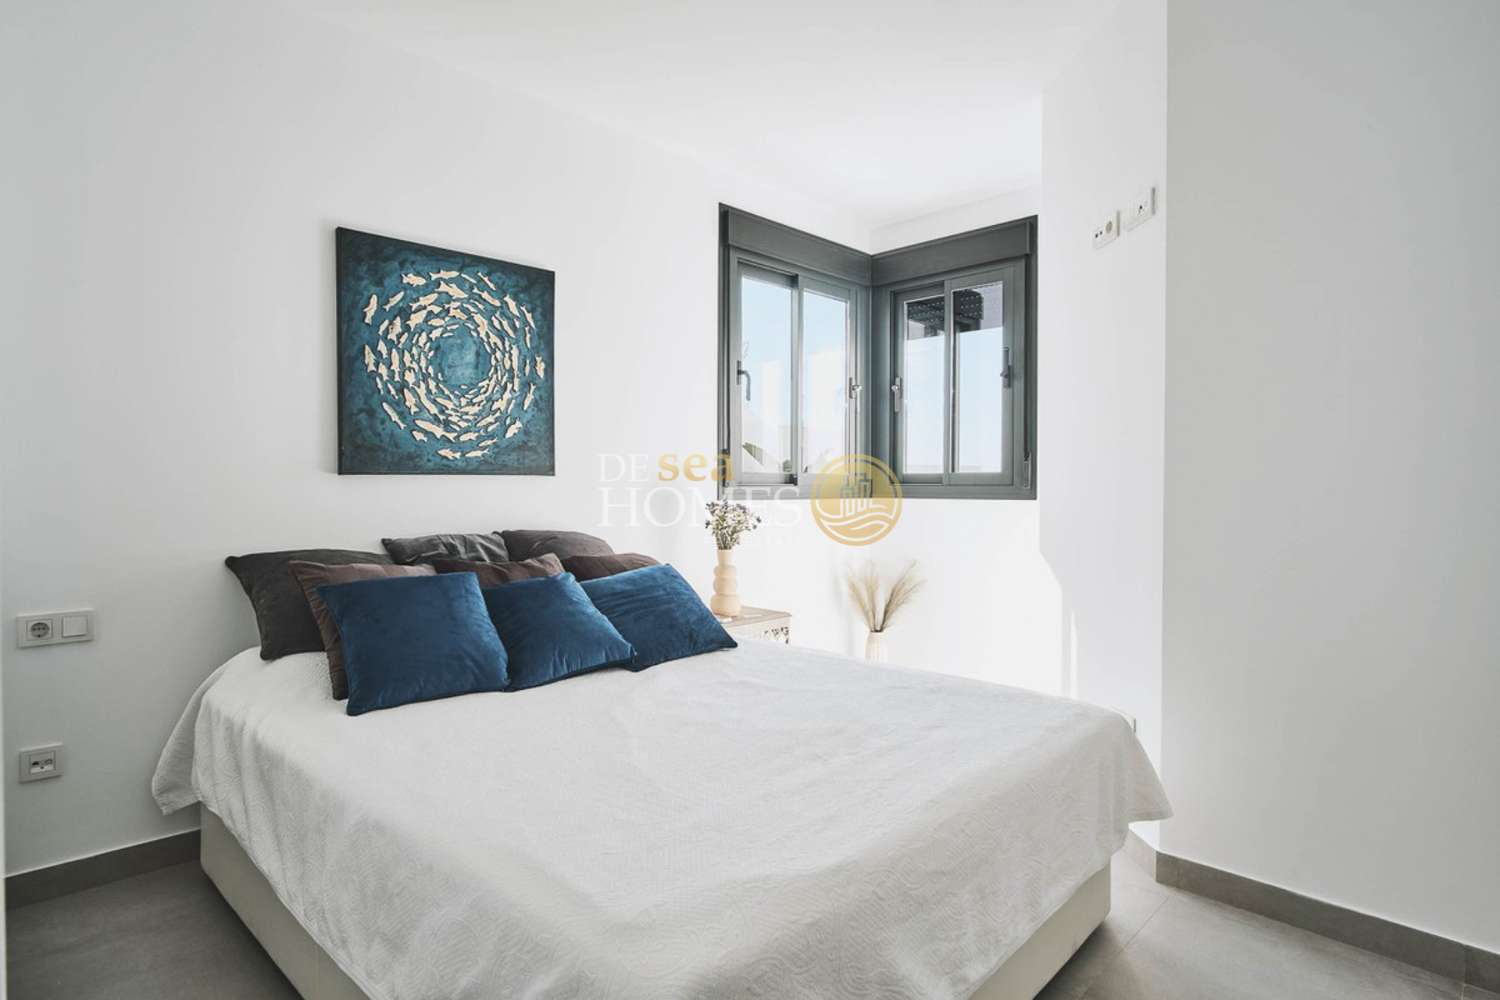 New Apartment with incredible sea views in Nerja